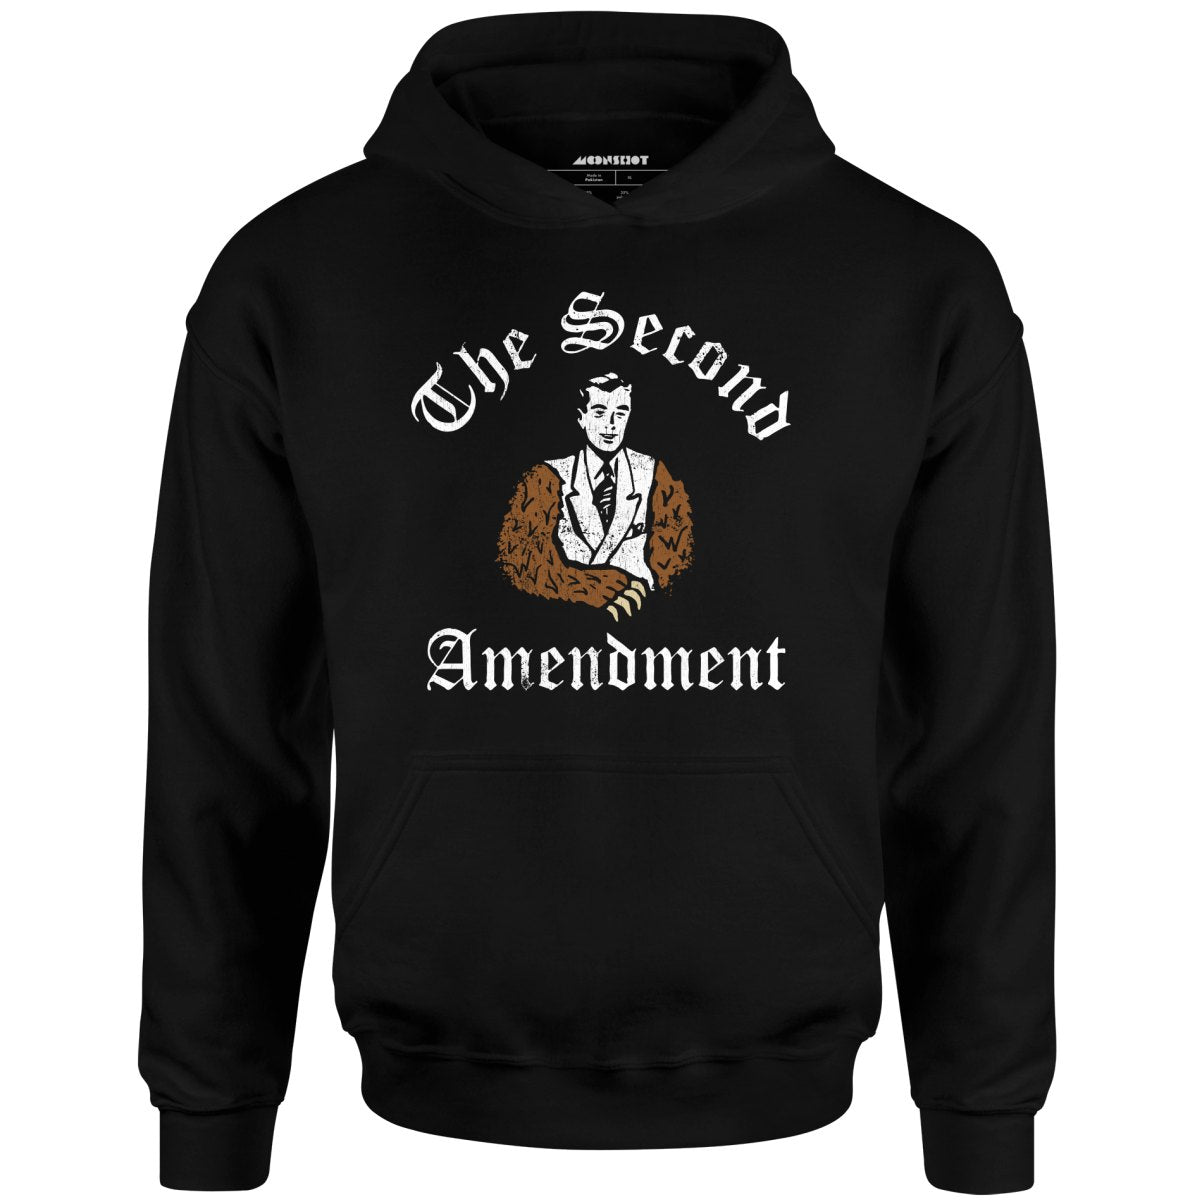 2nd Amendment - Right to Bear Arms - Unisex Hoodie